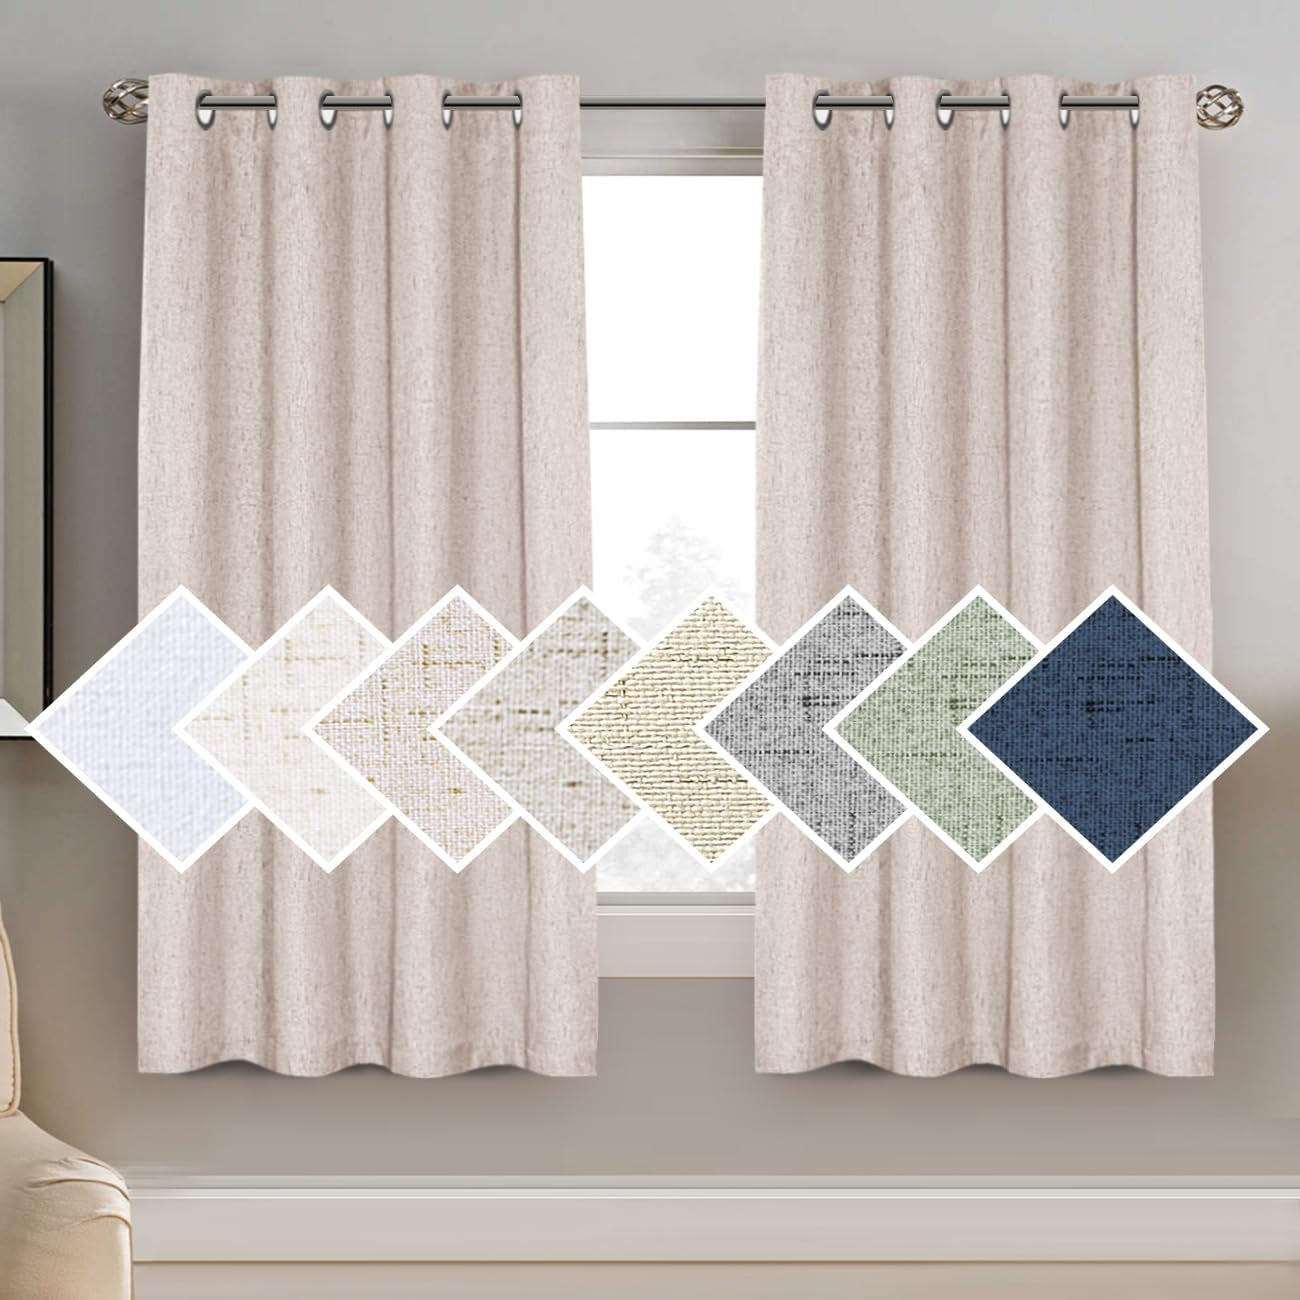 H.VERSAILTEX 100% Blackout Curtains for Bedroom Thermal Insulated Linen Textured Curtains Heat and Full Light Blocking Drapes Living Room Curtains 2 Panel Sets, 52X84 - Inch, Natural  H.VERSAILTEX Natural 1 Panel - 52"W X 63"L 